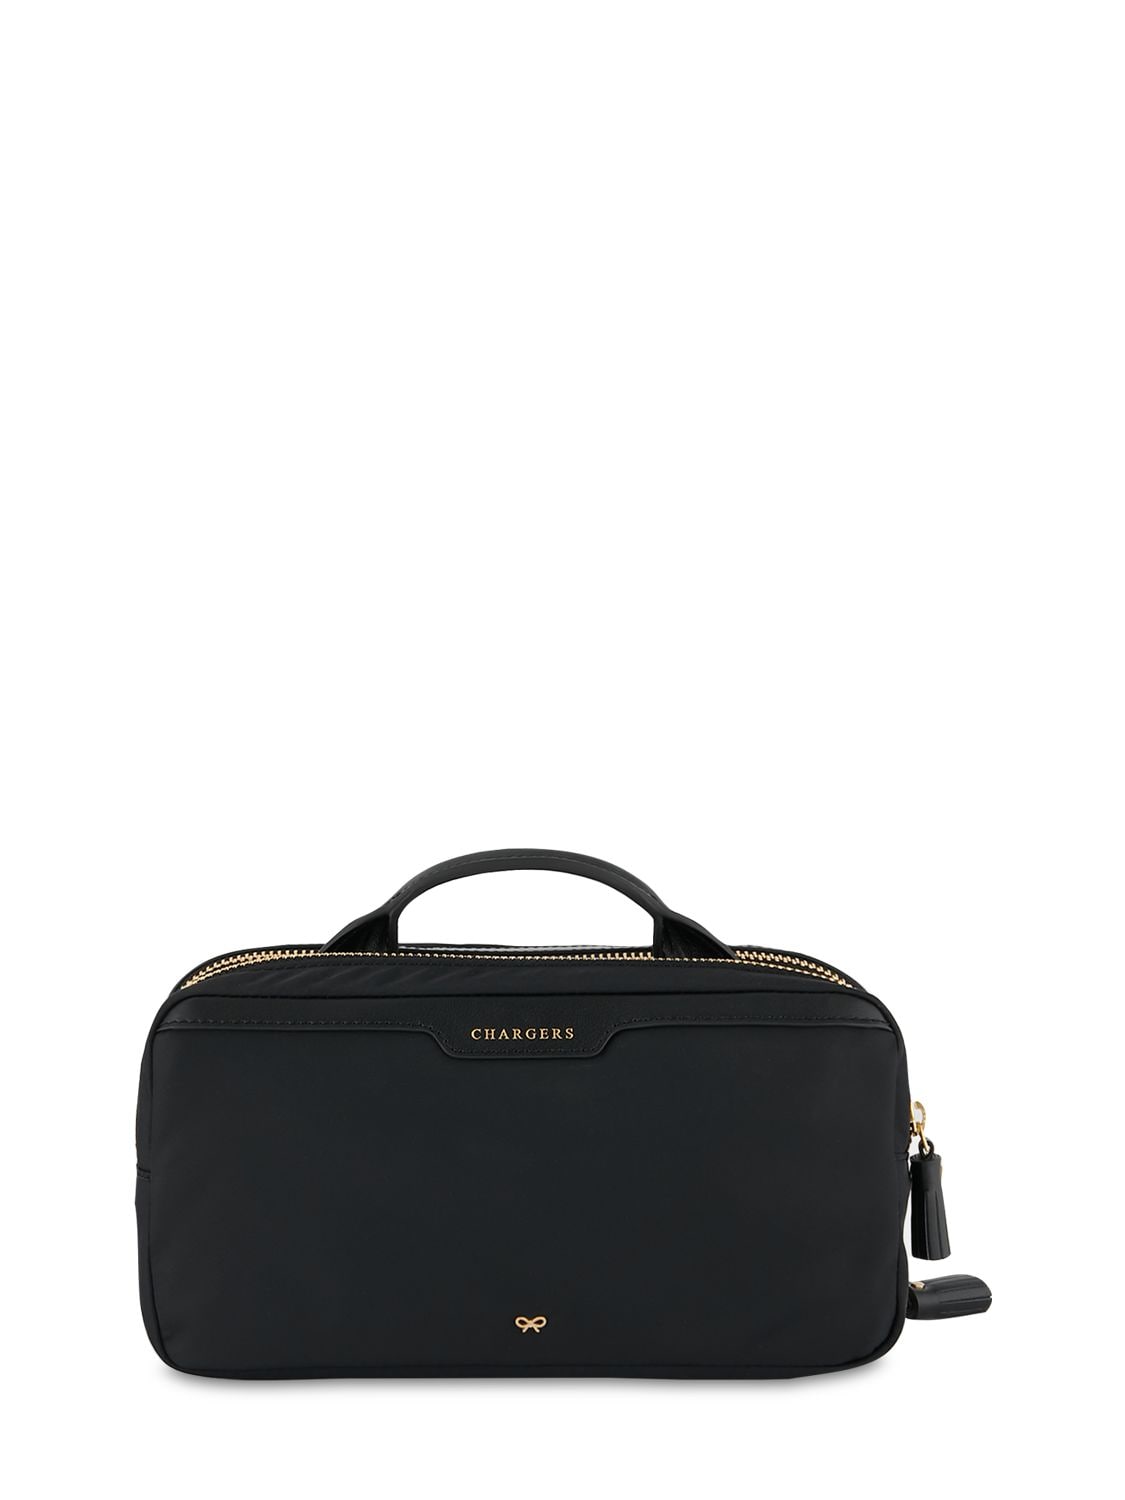 ANYA HINDMARCH HOME OFFICE RECYCLED NYLON BAG